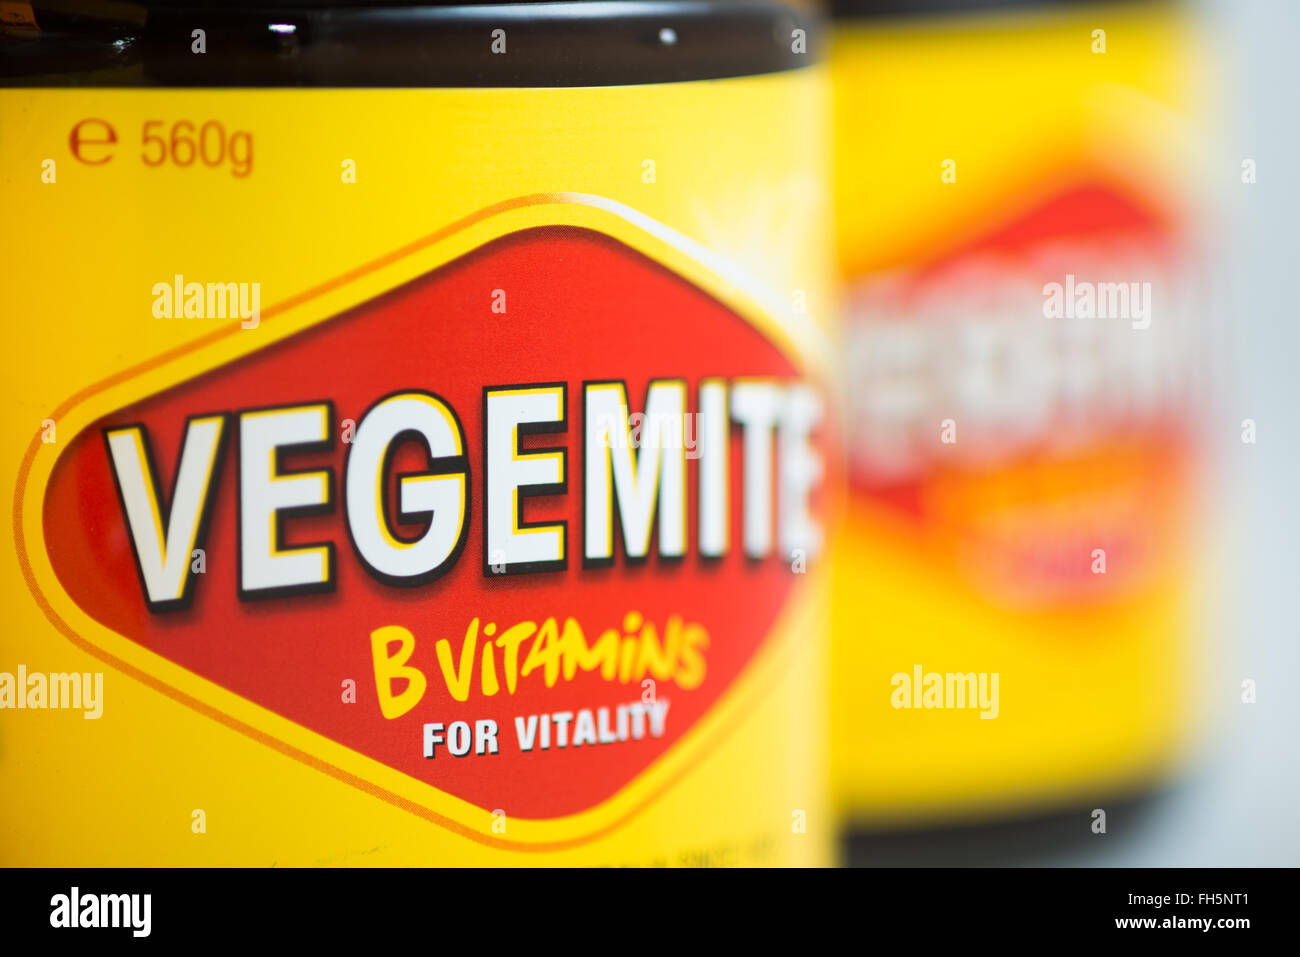 Vegemite is a dark brown Australian food paste made from brewers' yeast extract with various vegetable and spice additives. it was developed by Cyril P. Callister in Melbourne, Victoria, in 1922, as a locally sourced version of the British paste Marmite. It  has become a cultural icon. It is often put on toast. Stock Photo